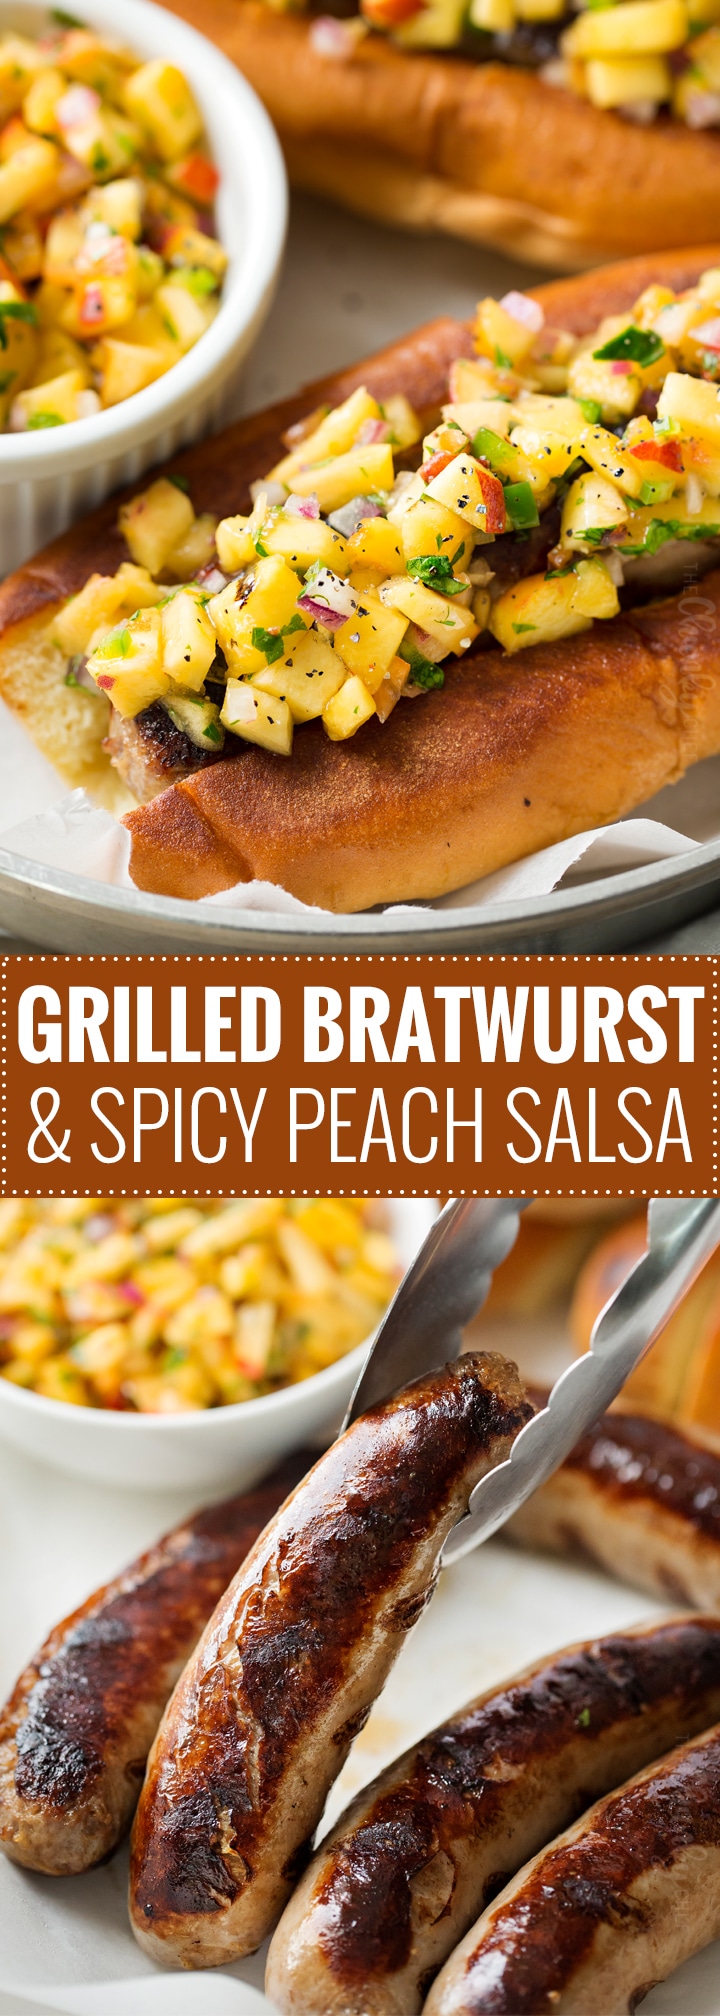 Grilled Bratwurst with Spicy Peach Salsa | No more boring brat toppings here... serve up your traditional grilled beer brats with this habanero peach salsa and prepare to be amazed!  Plus, tips for how to serve these brats when grilling isn't an option. | http://thechunkychef.com